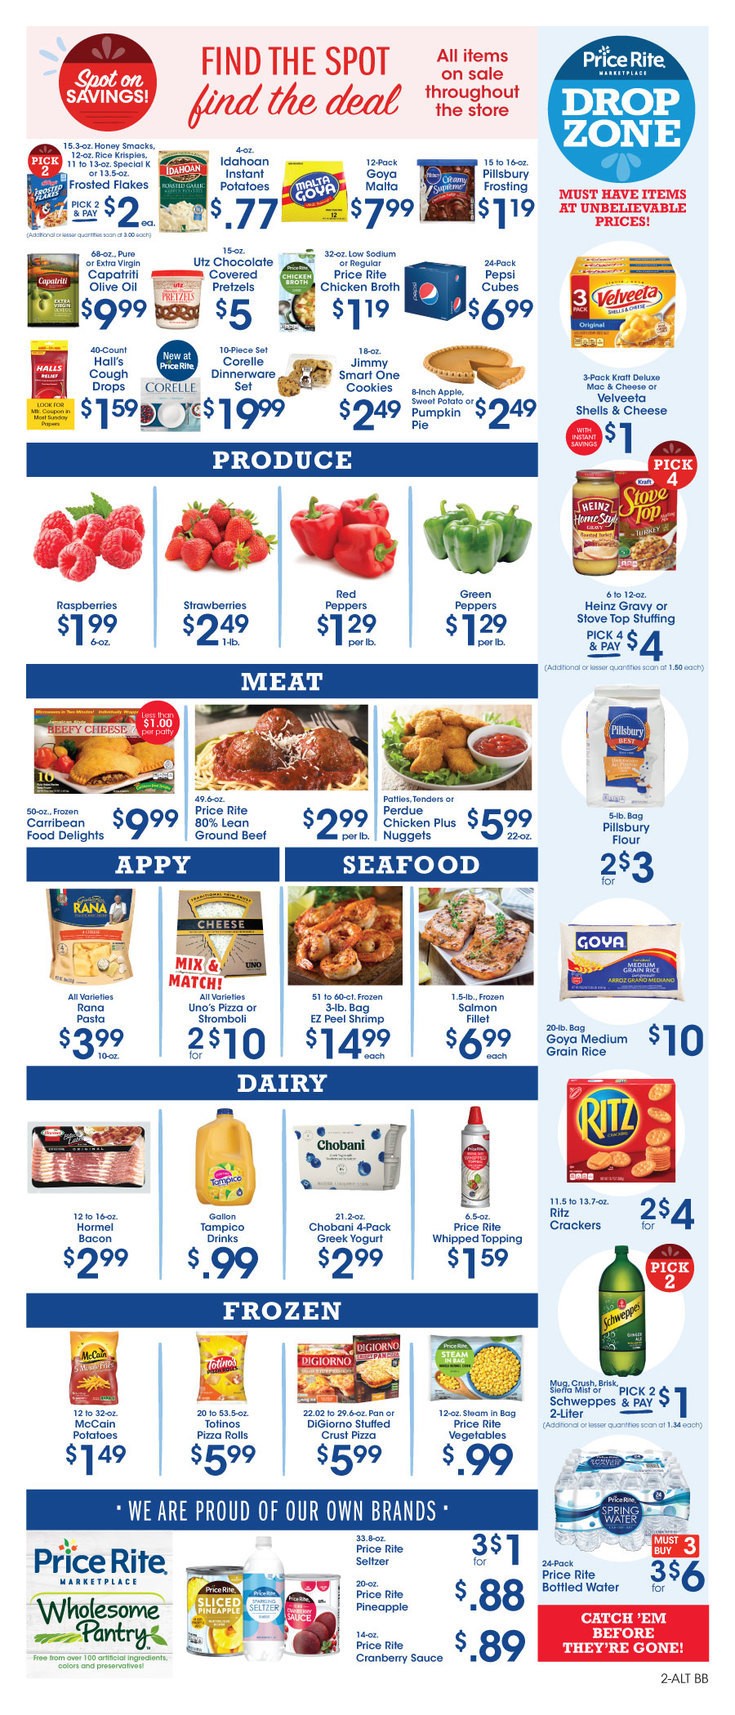 Price Rite Weekly Ad from November 1